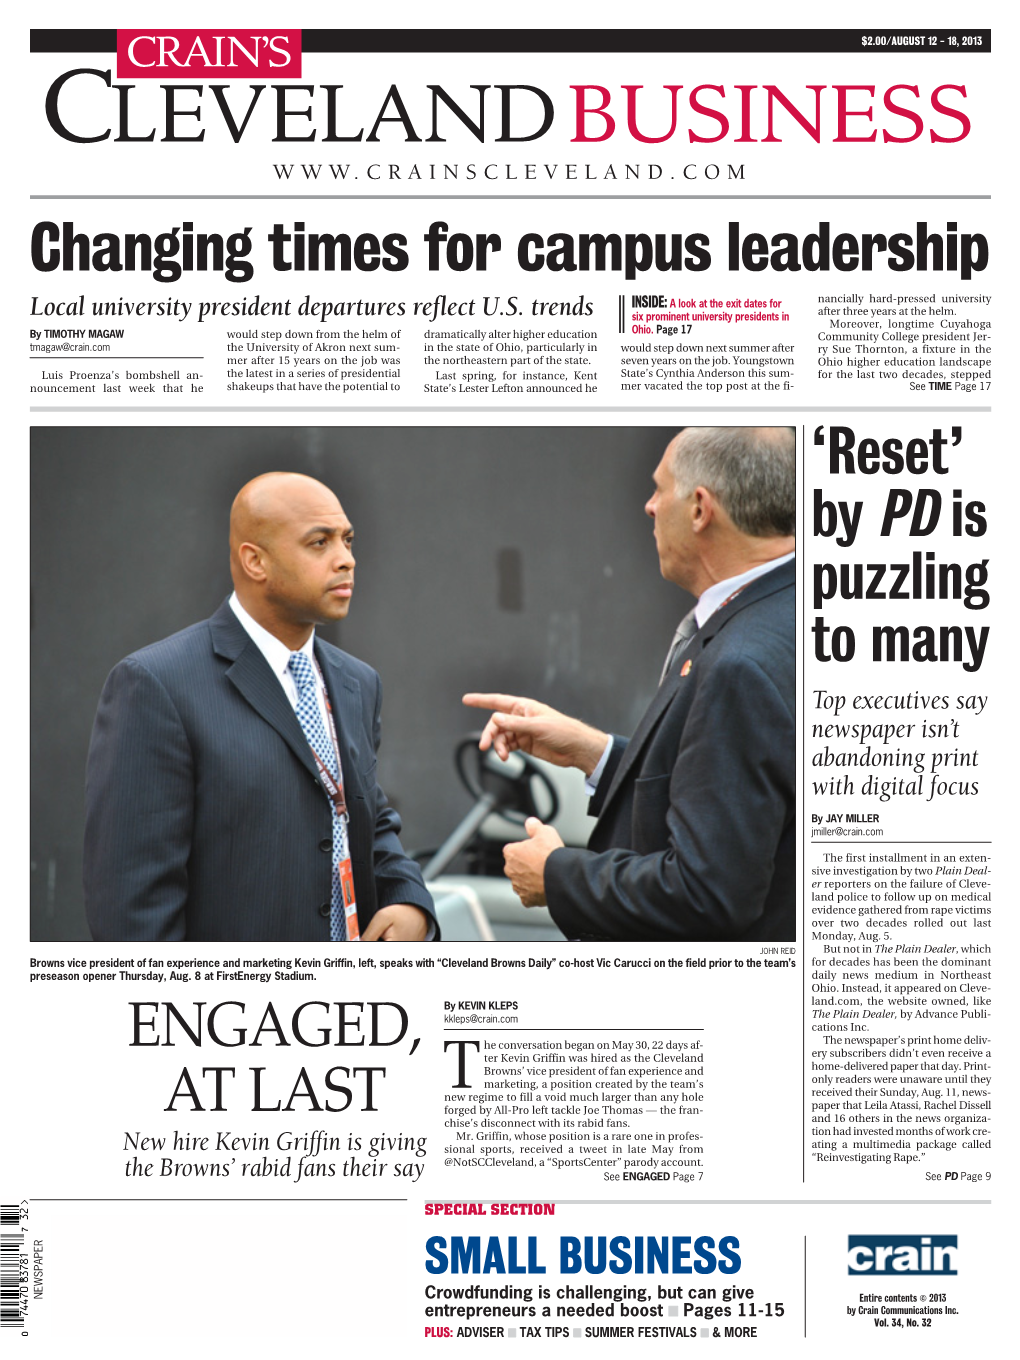 ENGAGED, at LAST Changing Times for Campus Leadership